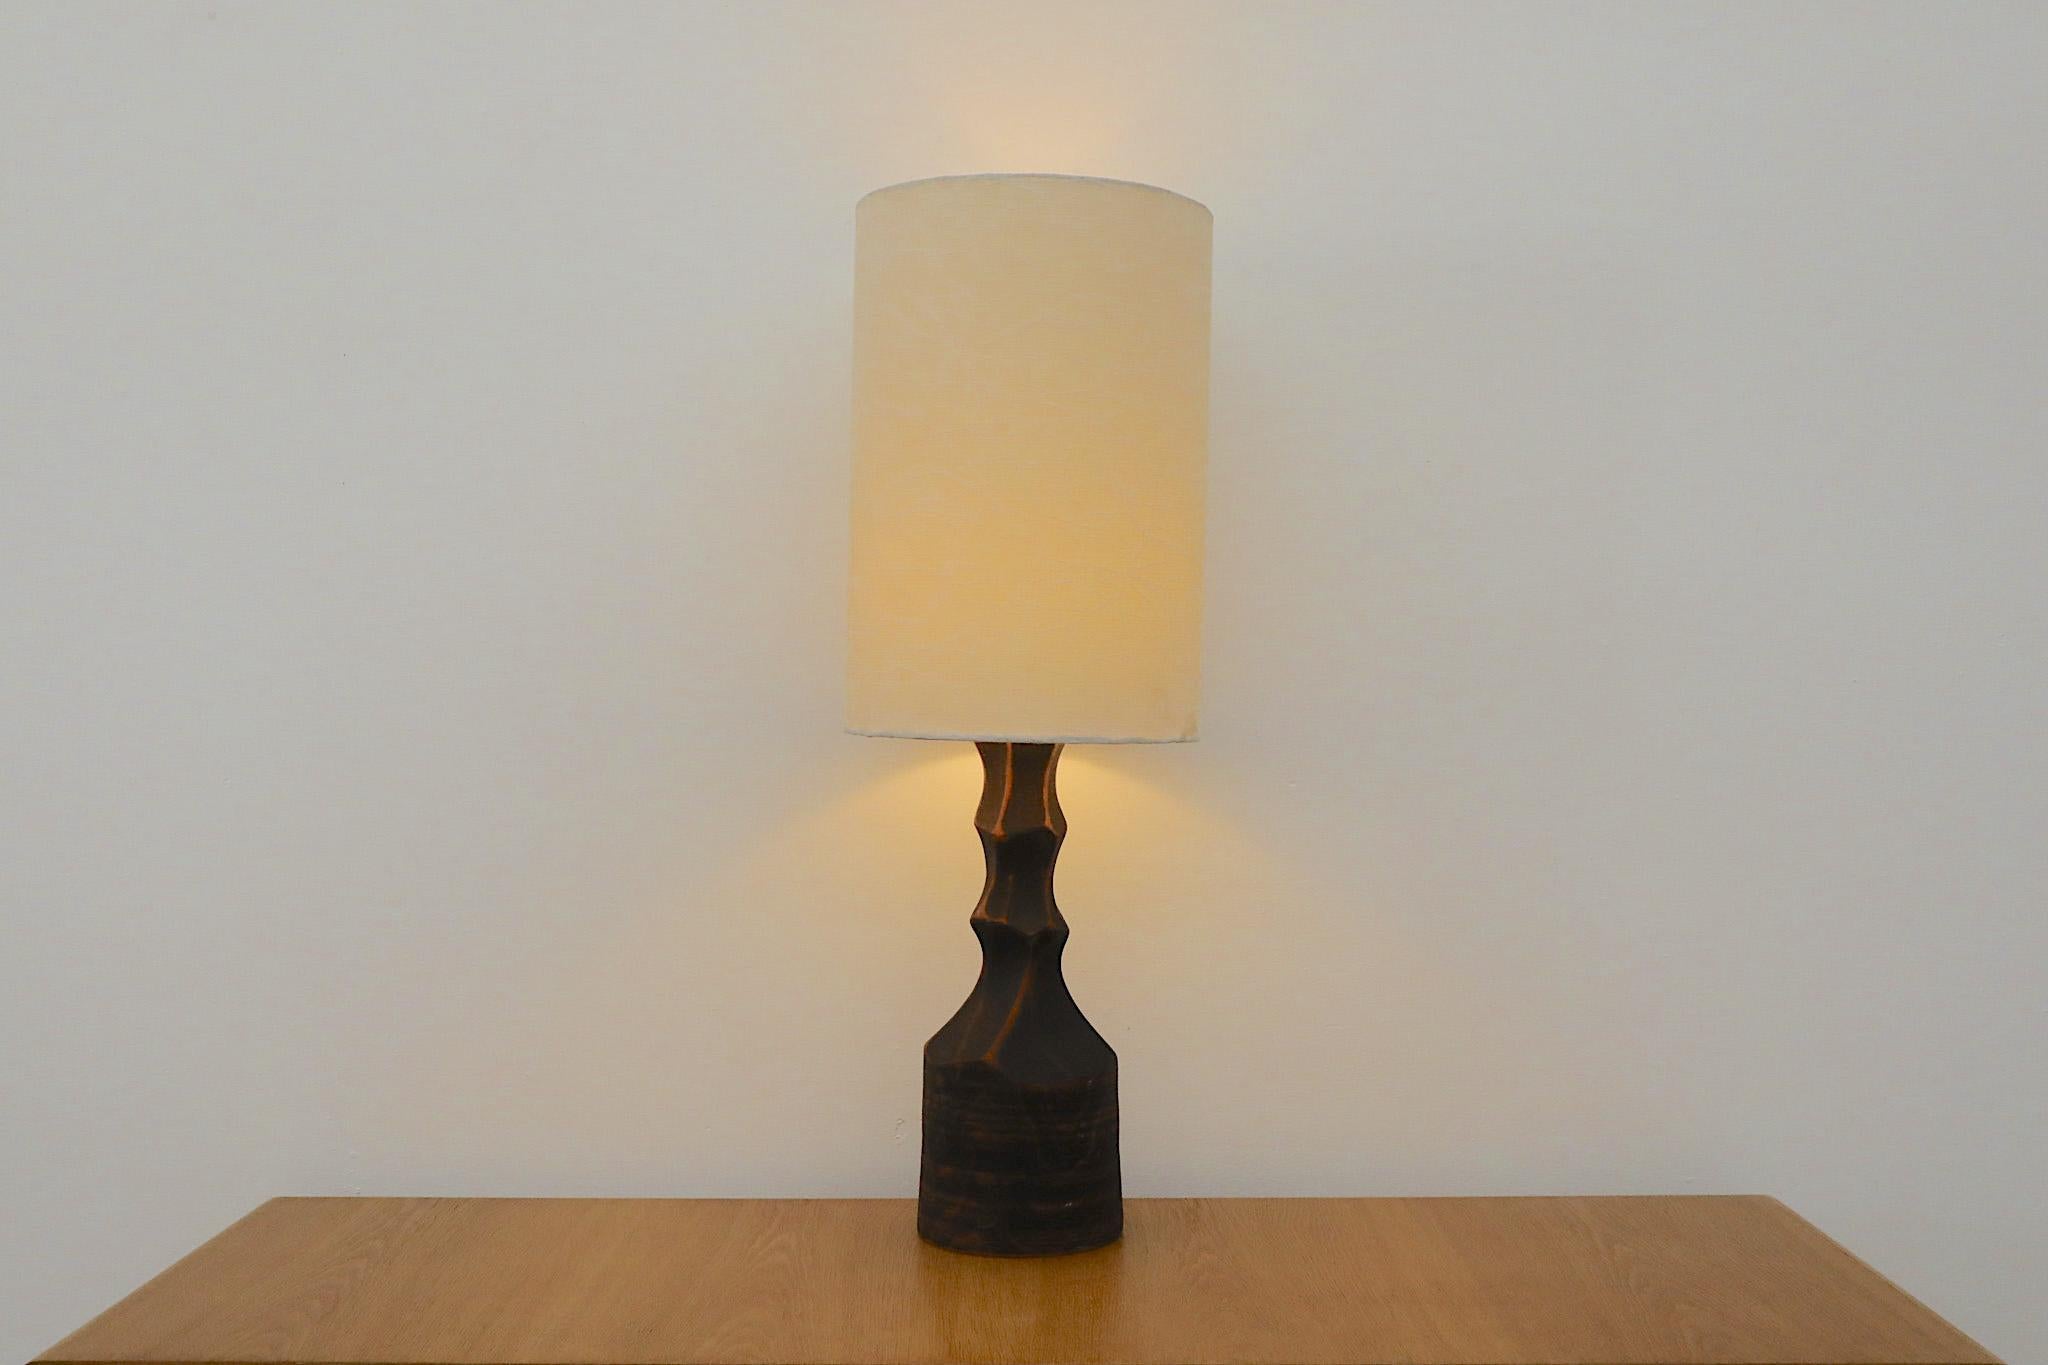 Incredible, Uno Kristiansson style, expertly hand crafted mid-century wood table lamp with linen shade. Solid fired wood base with beautiful grain highlighted by subtle complimentary red tones. In original condition with some visible wear consistent